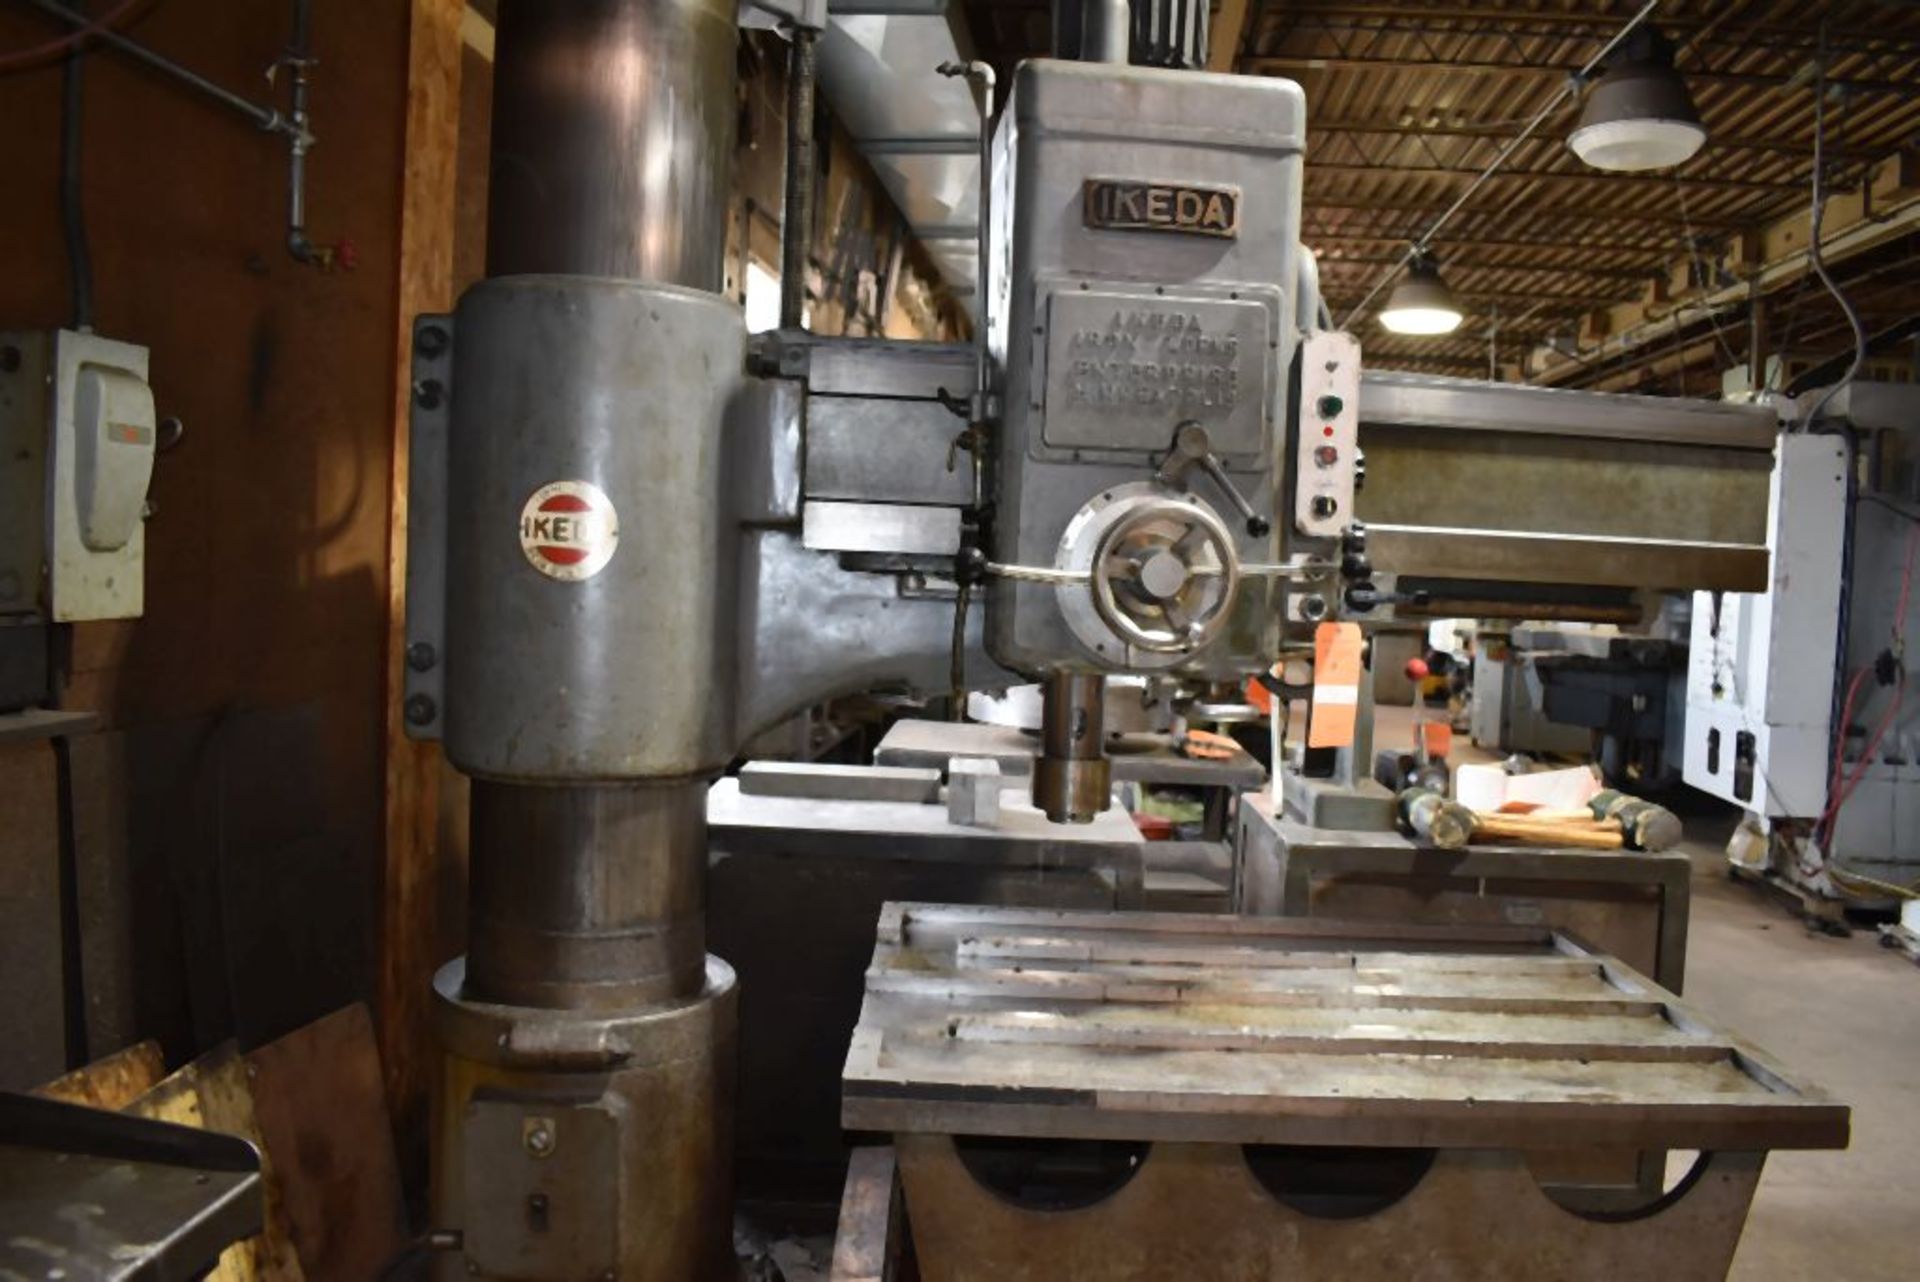 1979 IKEDA RADIAL ARM DRILL, MODEL RM-1300, S/N: 79087, 13" COLUMN x 60" ARM, 36" x 48" TABLE, T- - Image 2 of 4